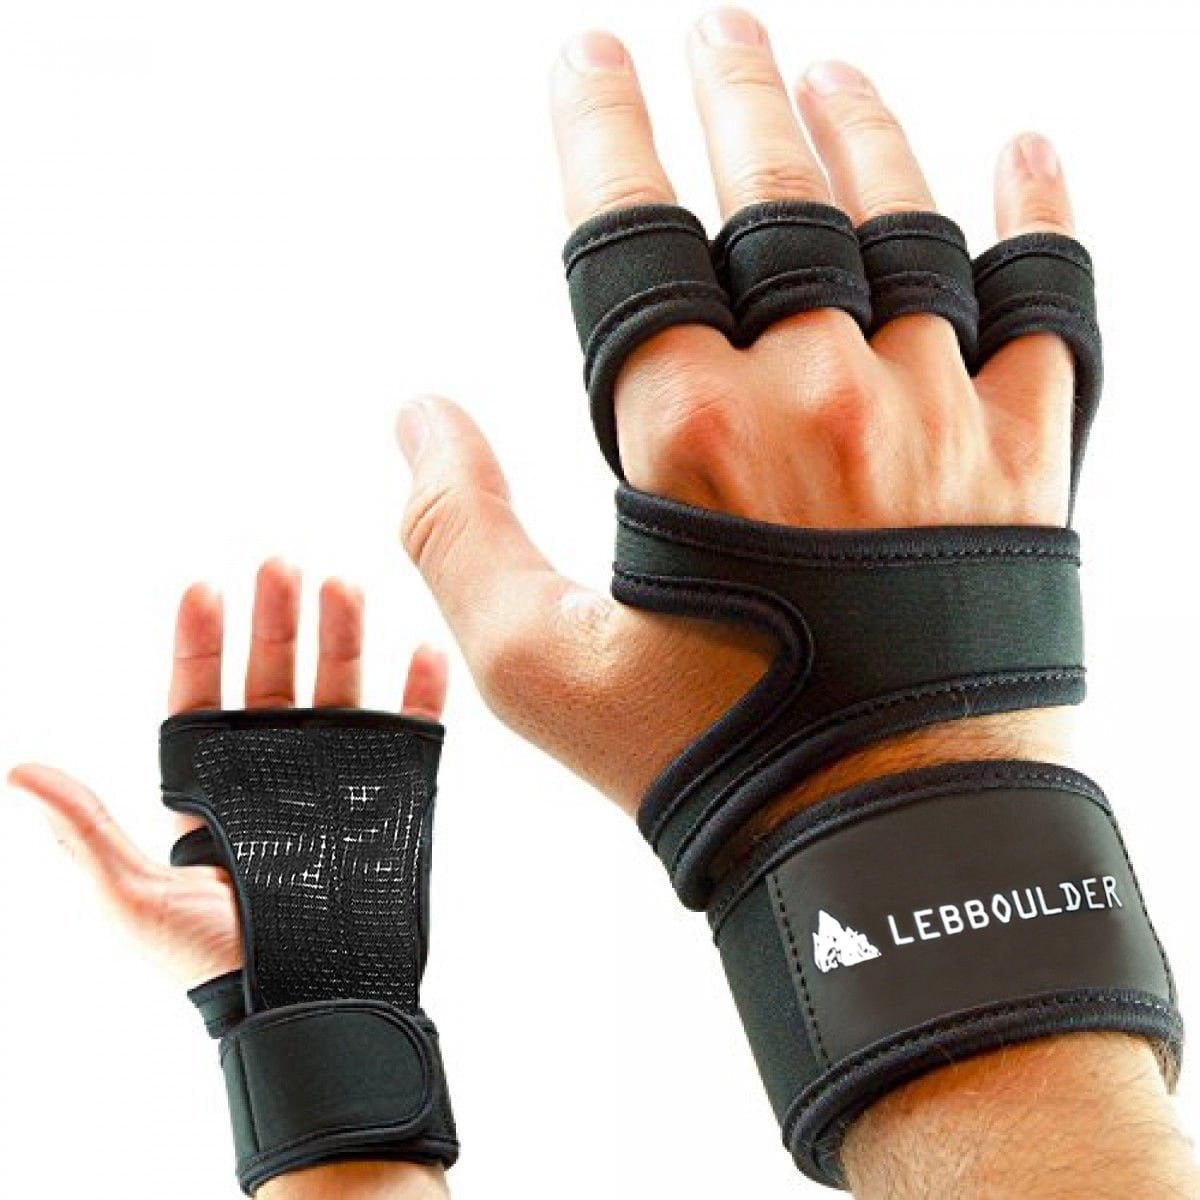 Mens Gym Weight Lifting Gloves Training Fitness Wrist Strap Support CLEARANCE 